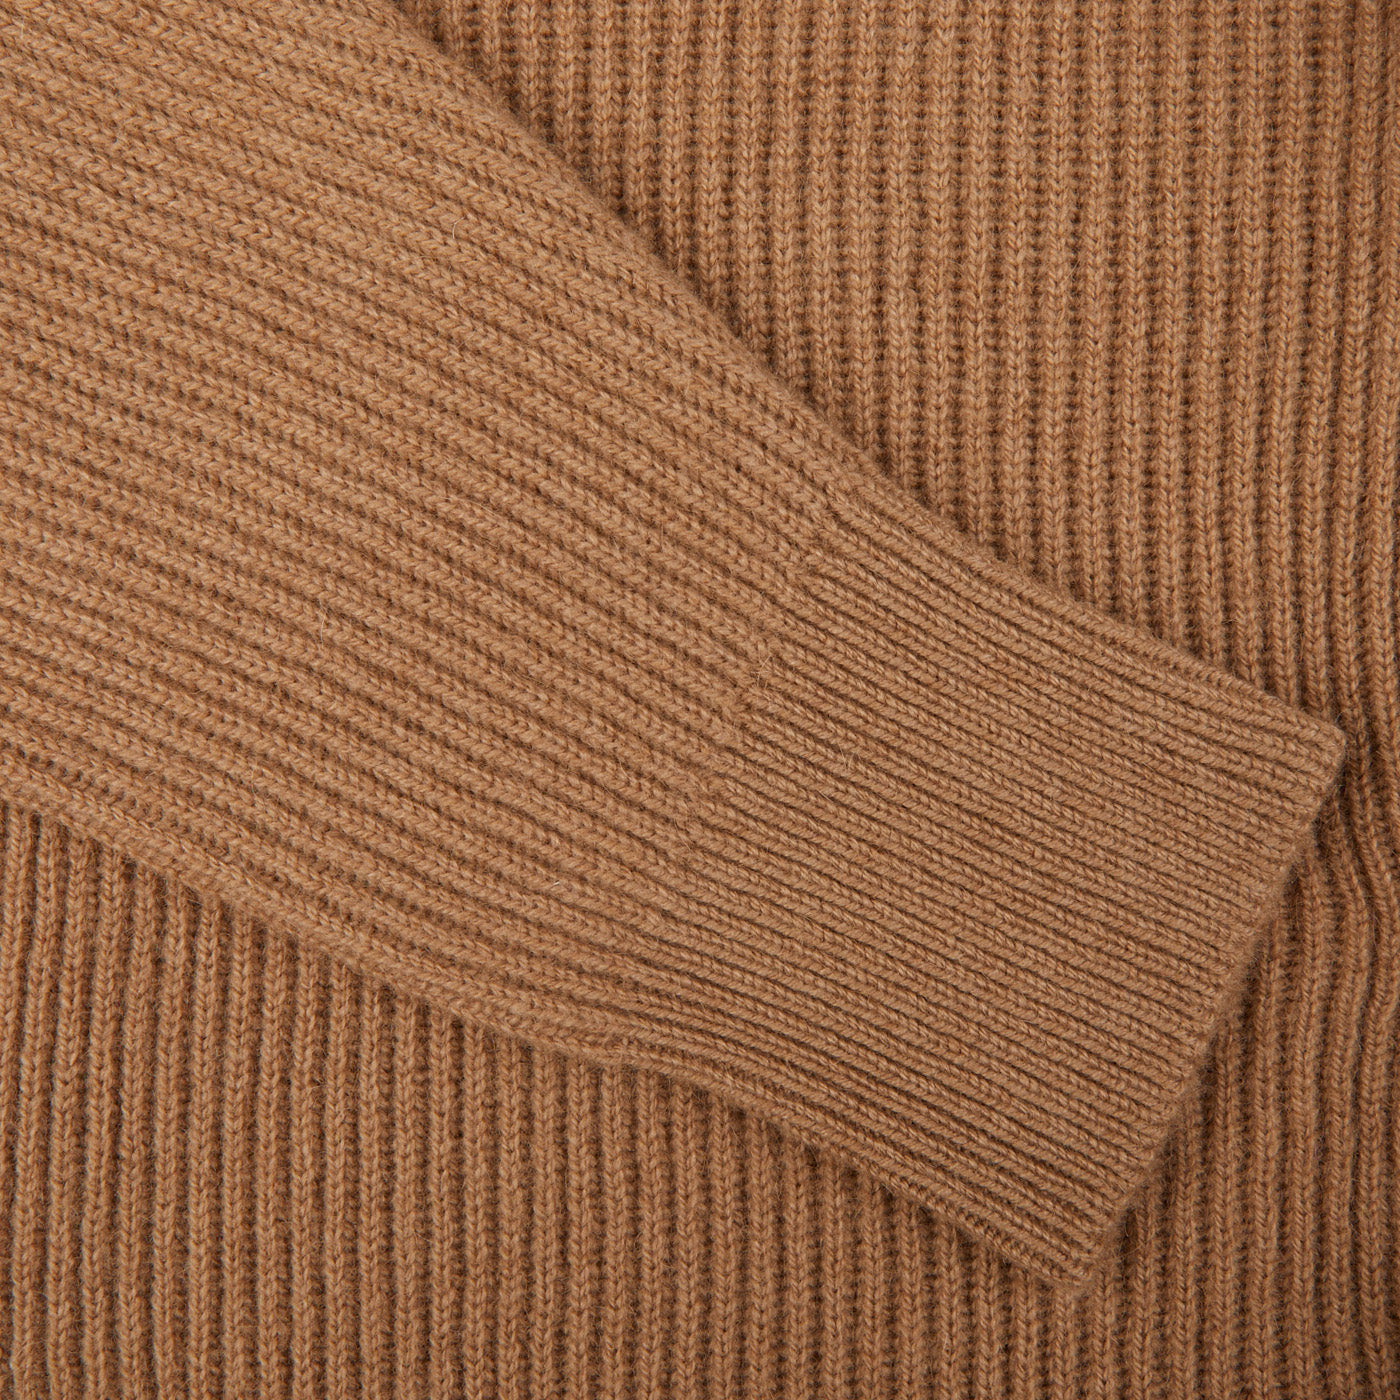 A close up image of a William Lockie Brown Camel Hair Shawl Collar Cardigan in camel brown.